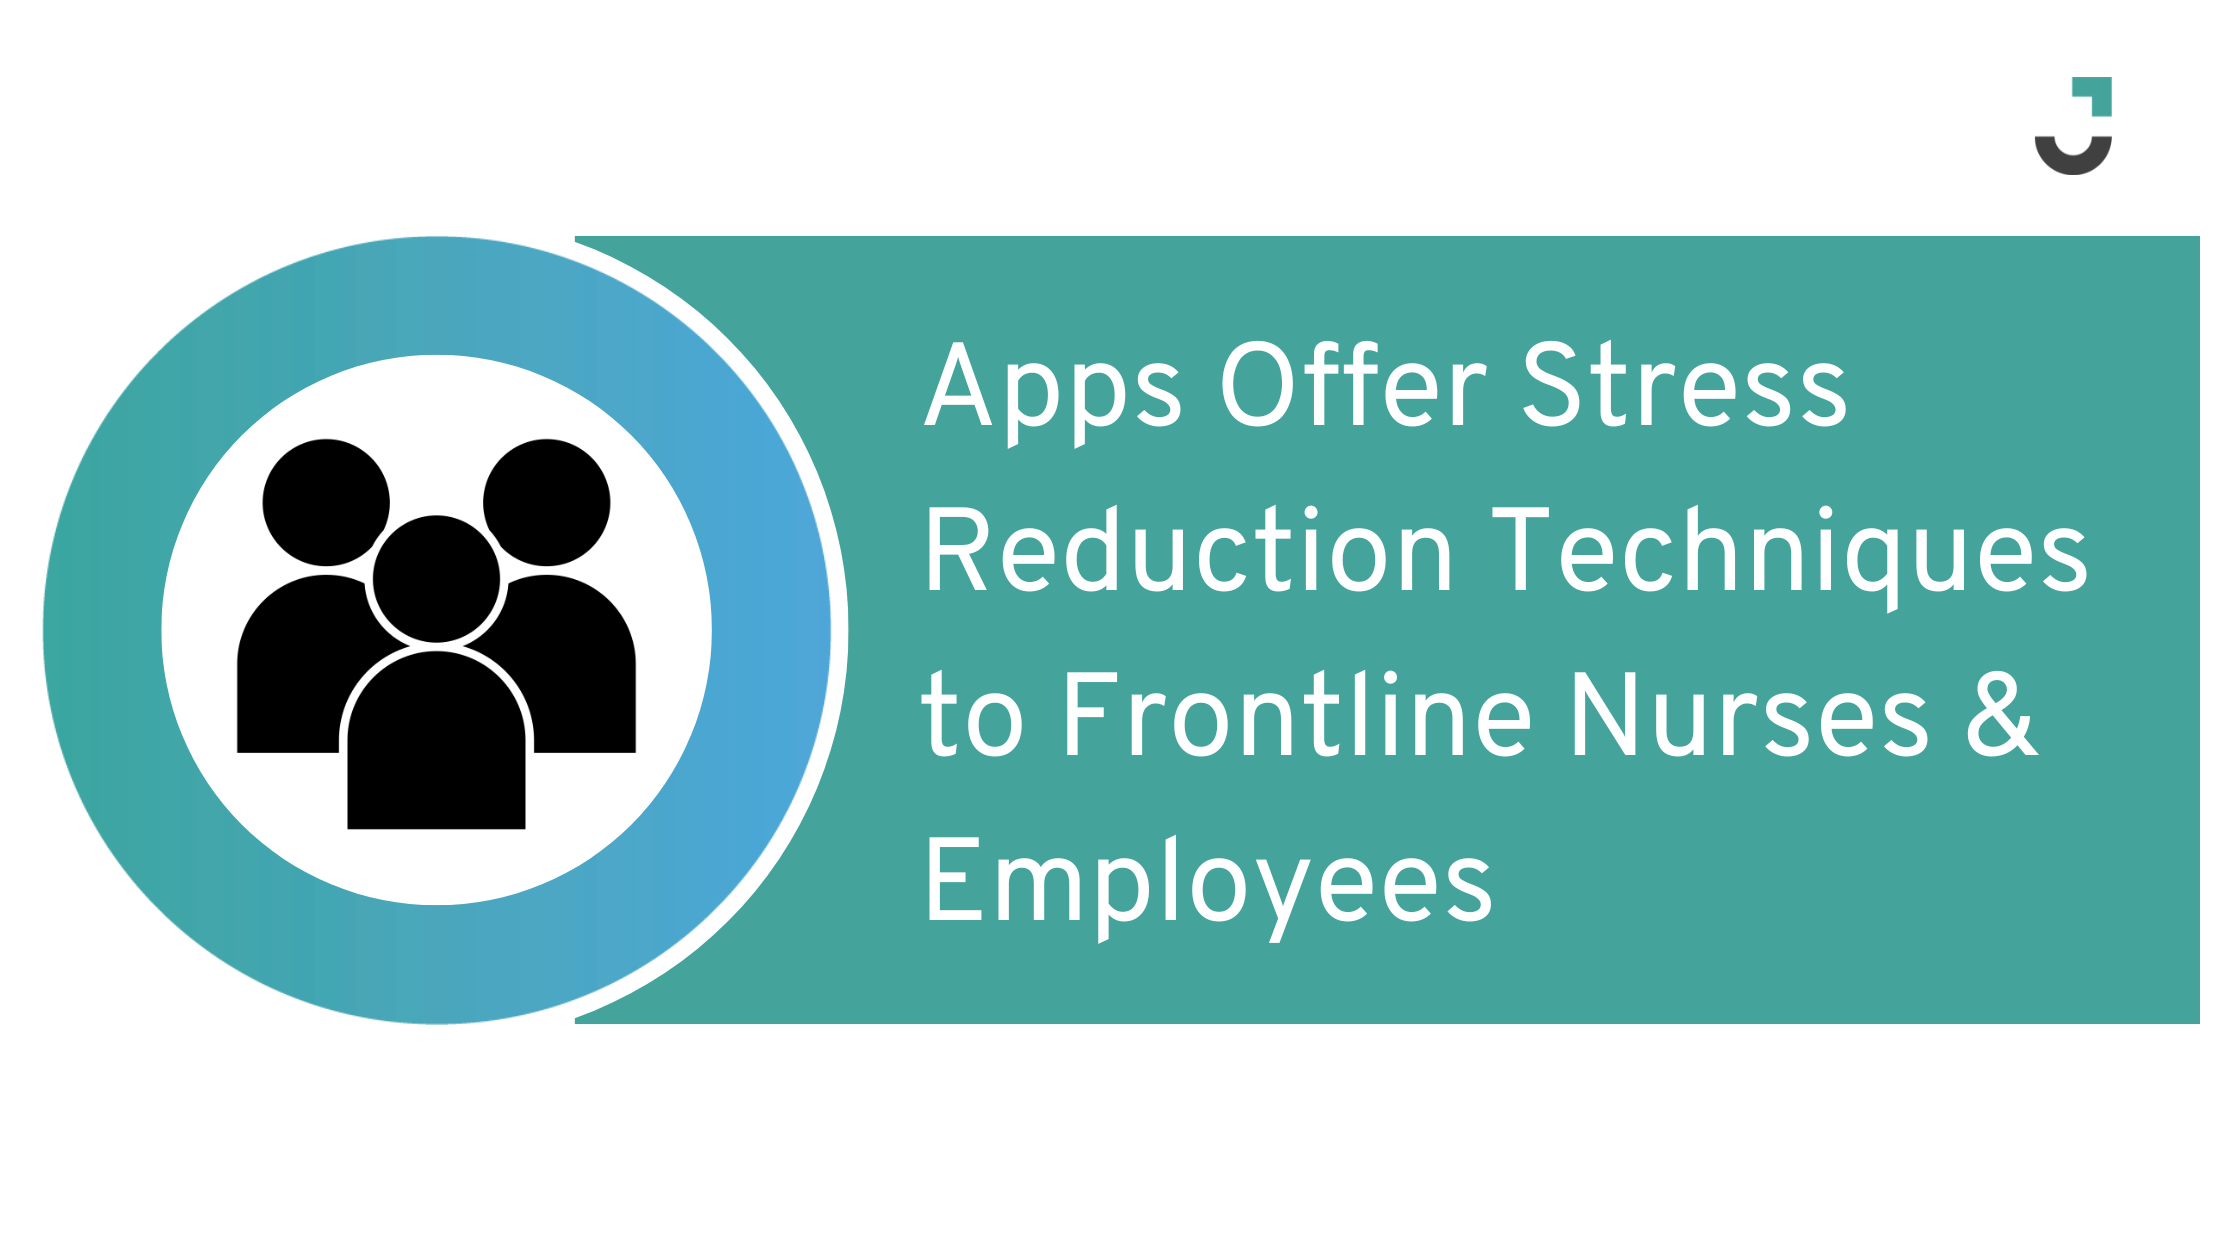 Apps Offer Stress Reduction Techniques to Frontline Nurses & Employees